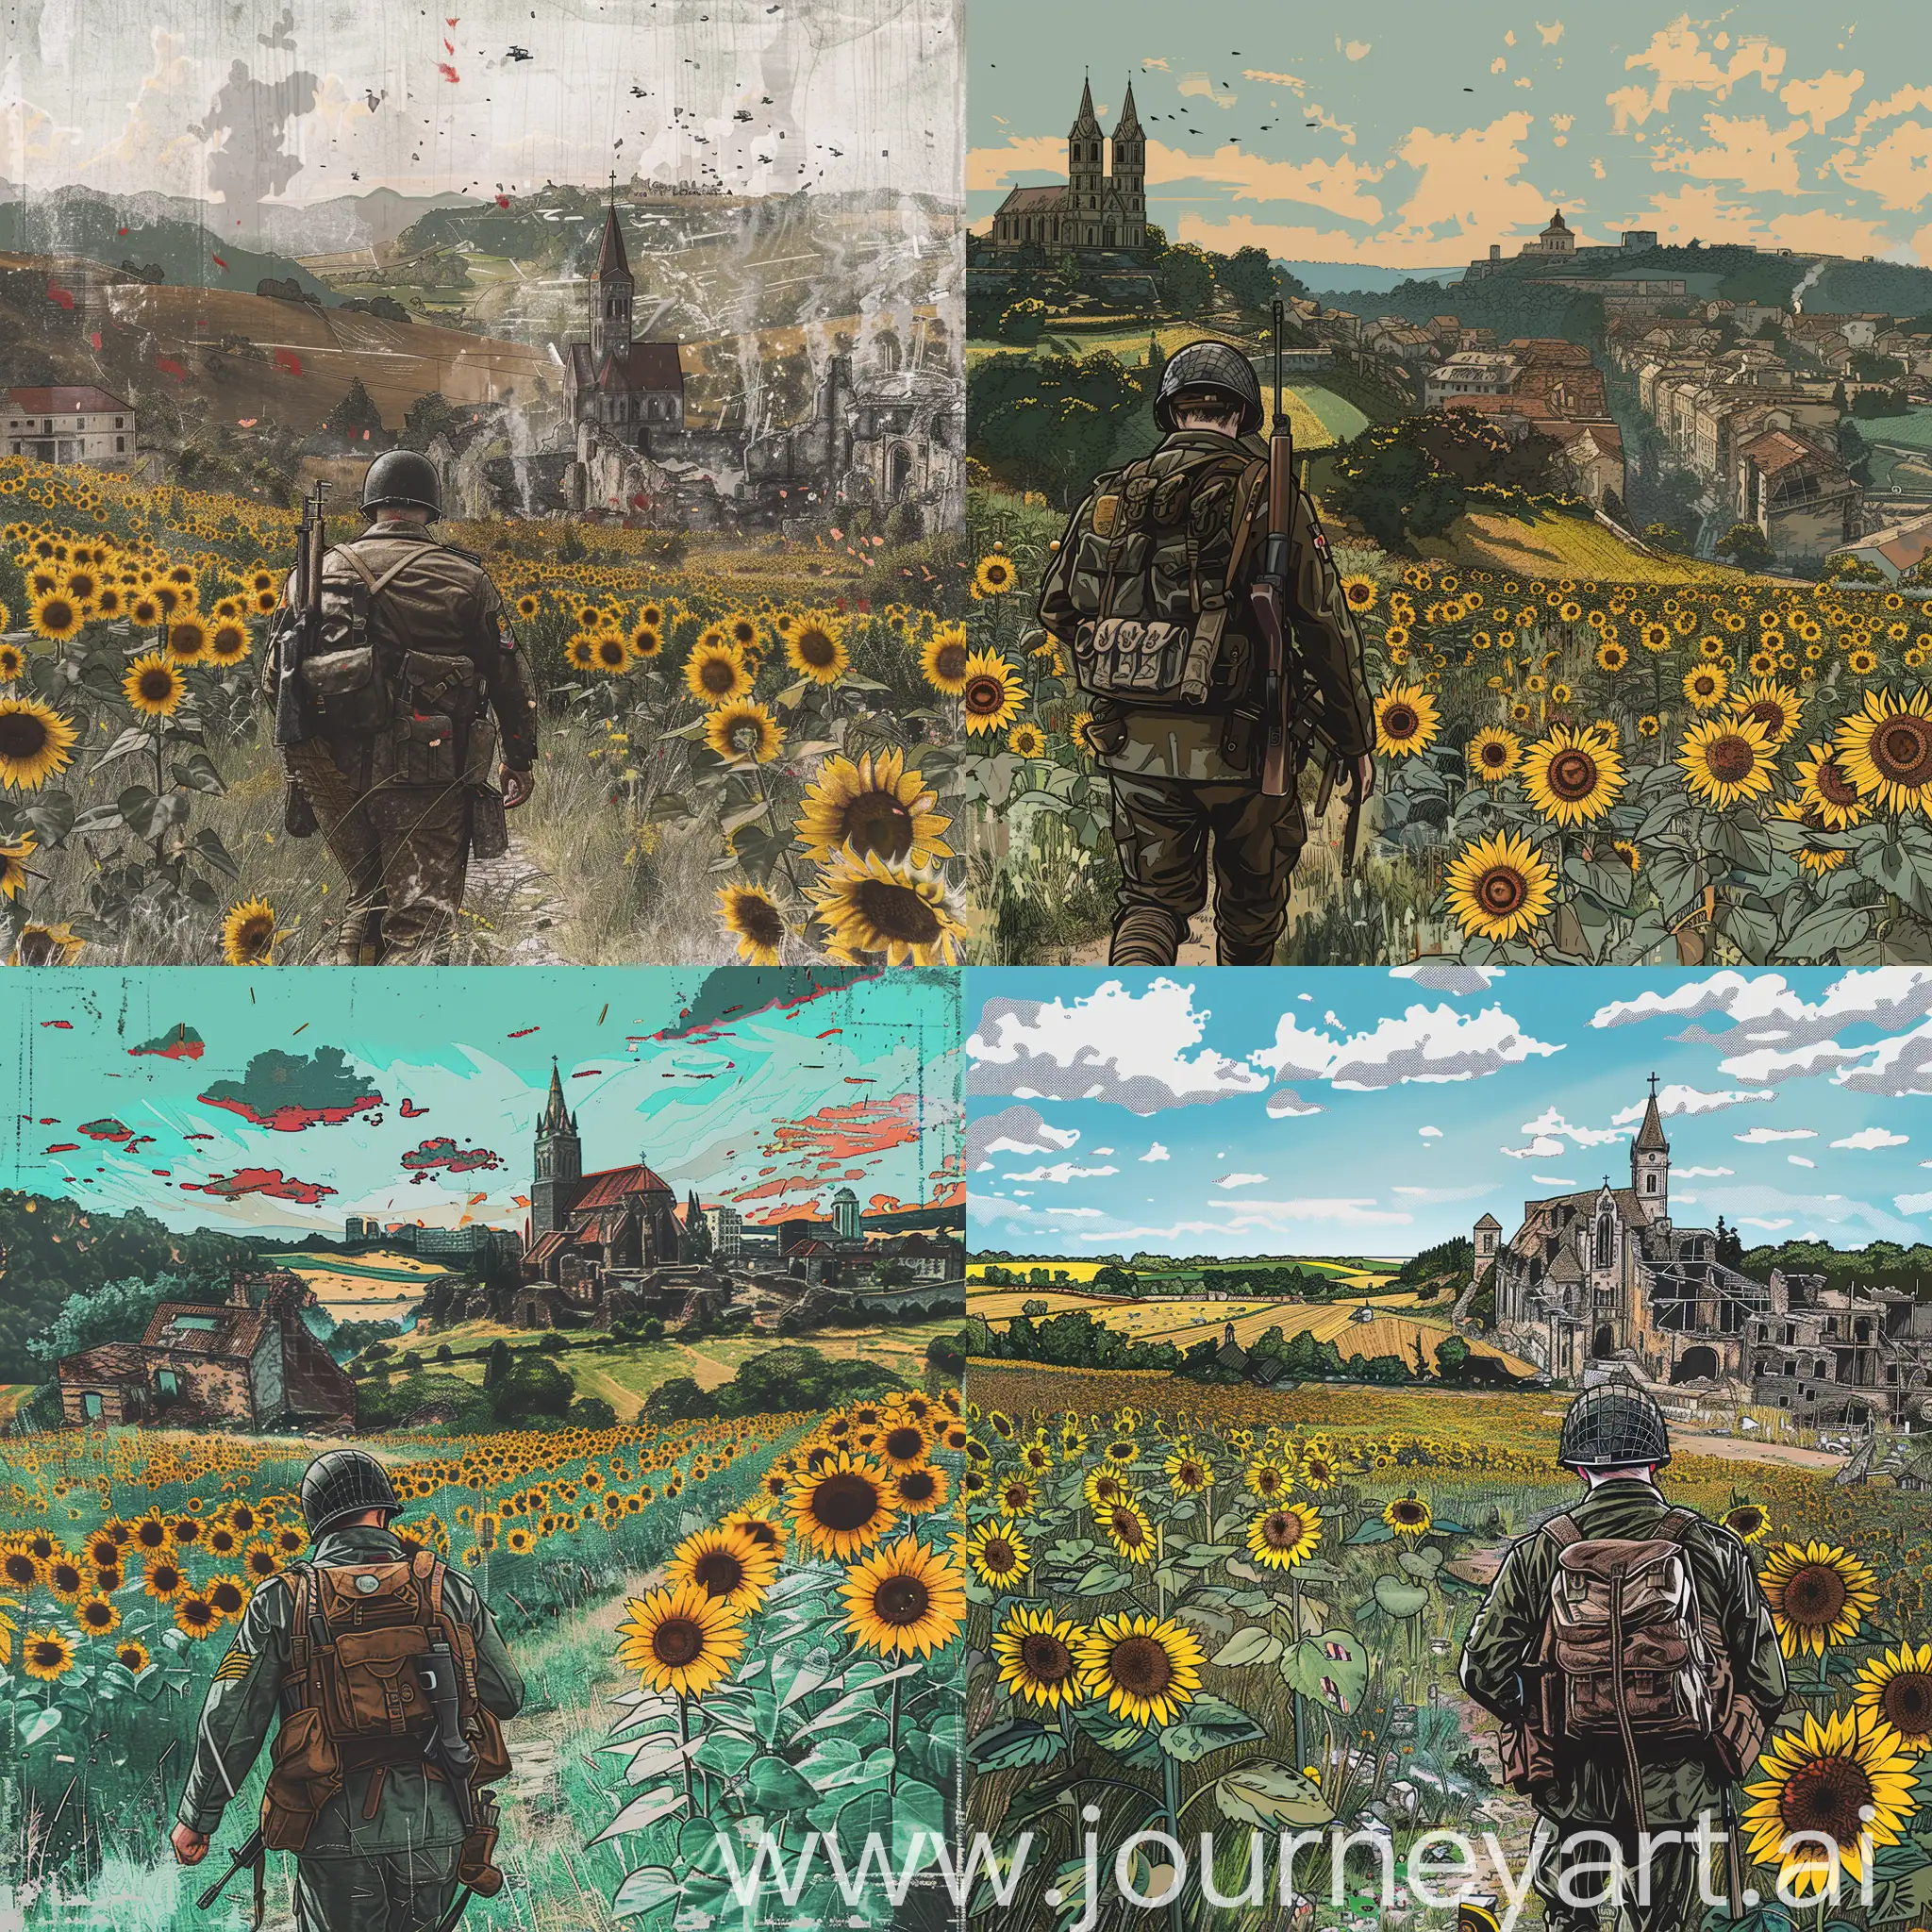 WWII-Battlefield-V-Soldier-Amid-Sunflower-Field-and-Dilapidated-Cityscape